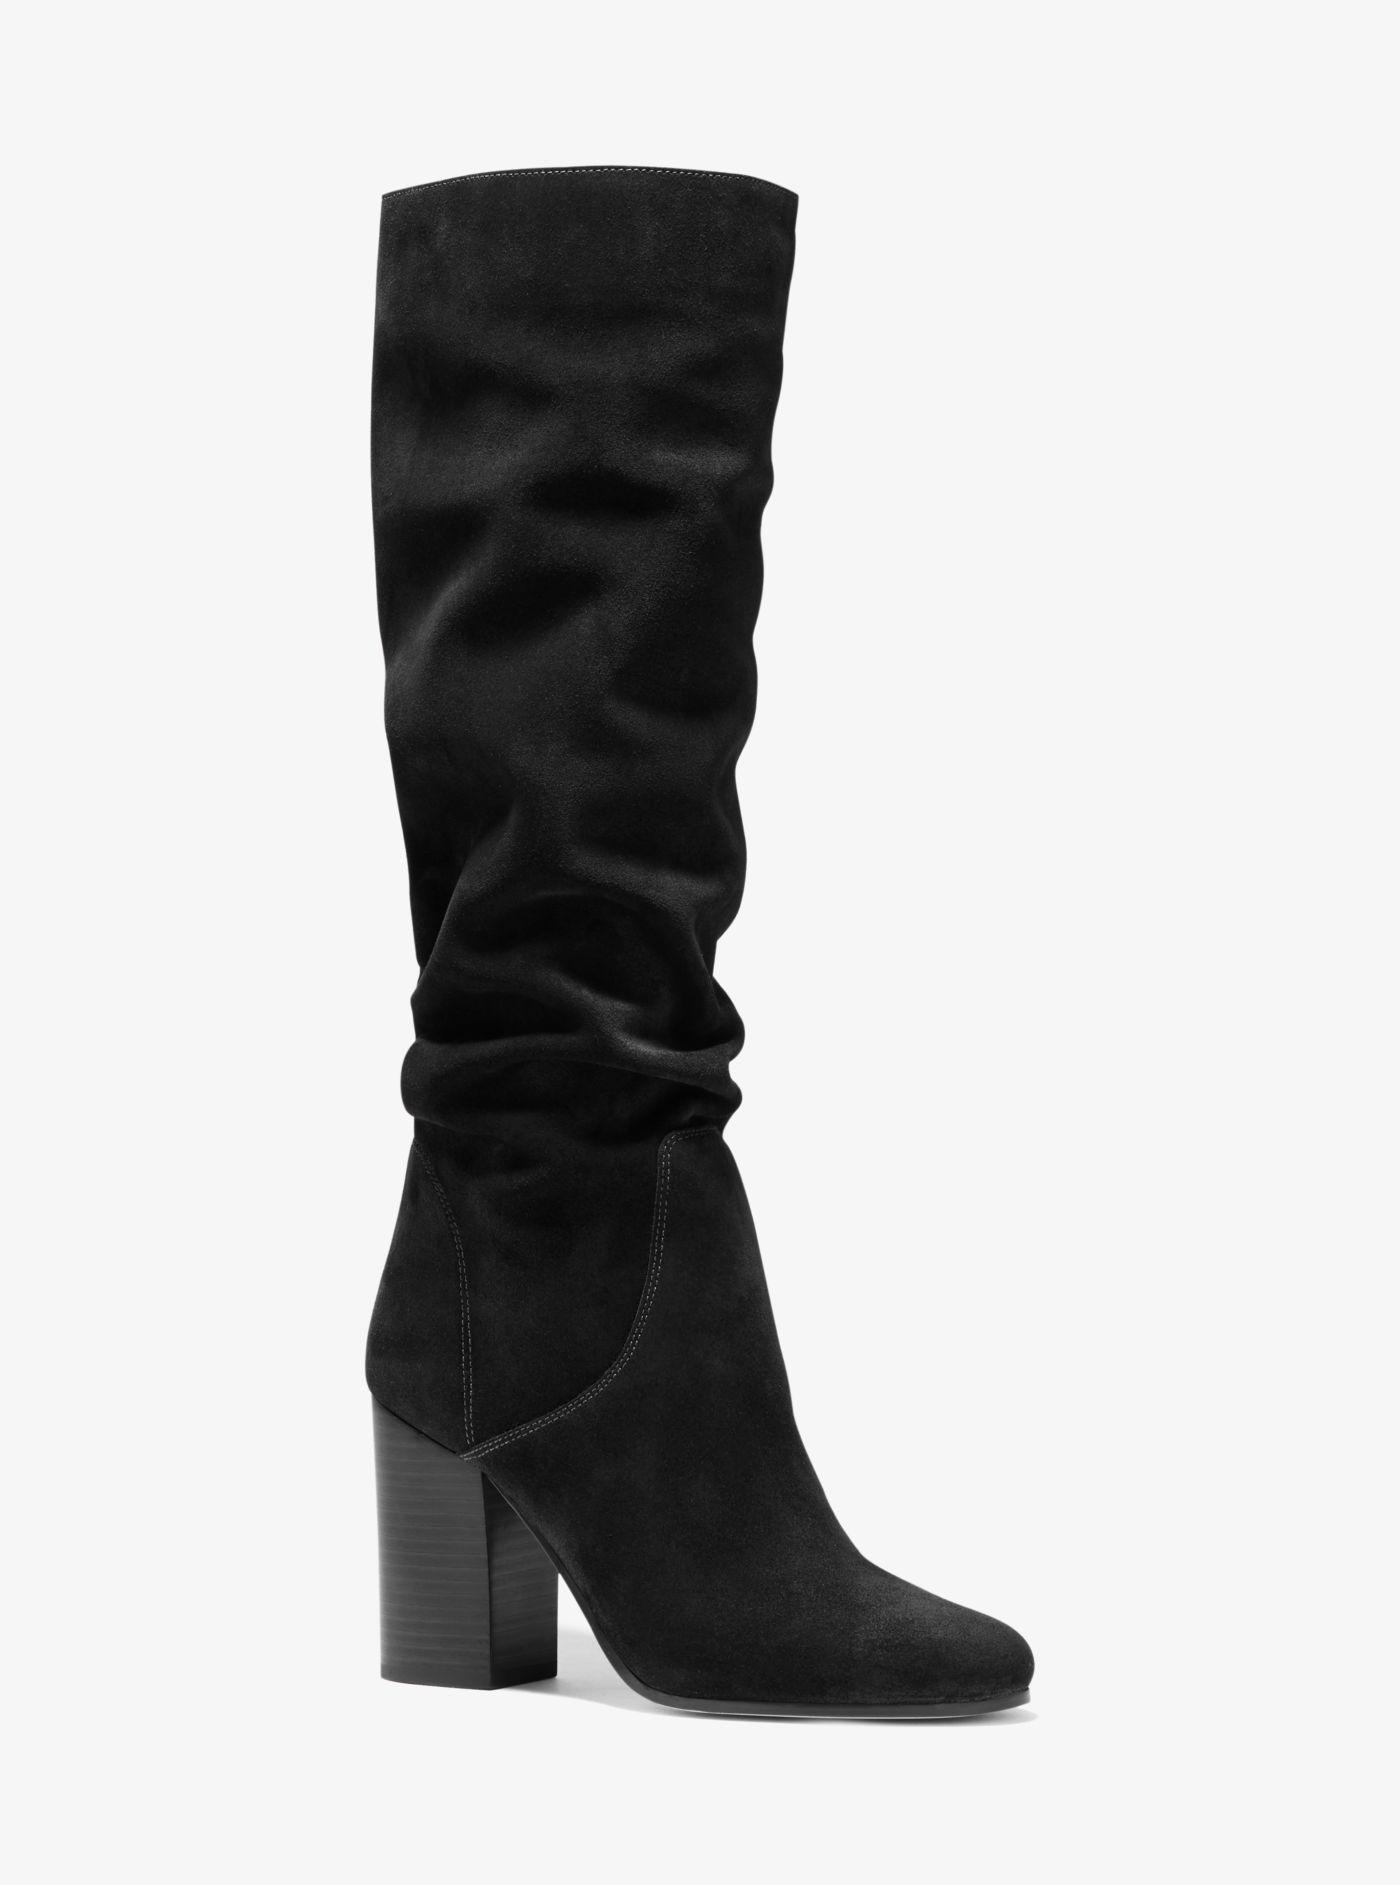 Michael Kors Leigh Suede Boot in Black - Lyst